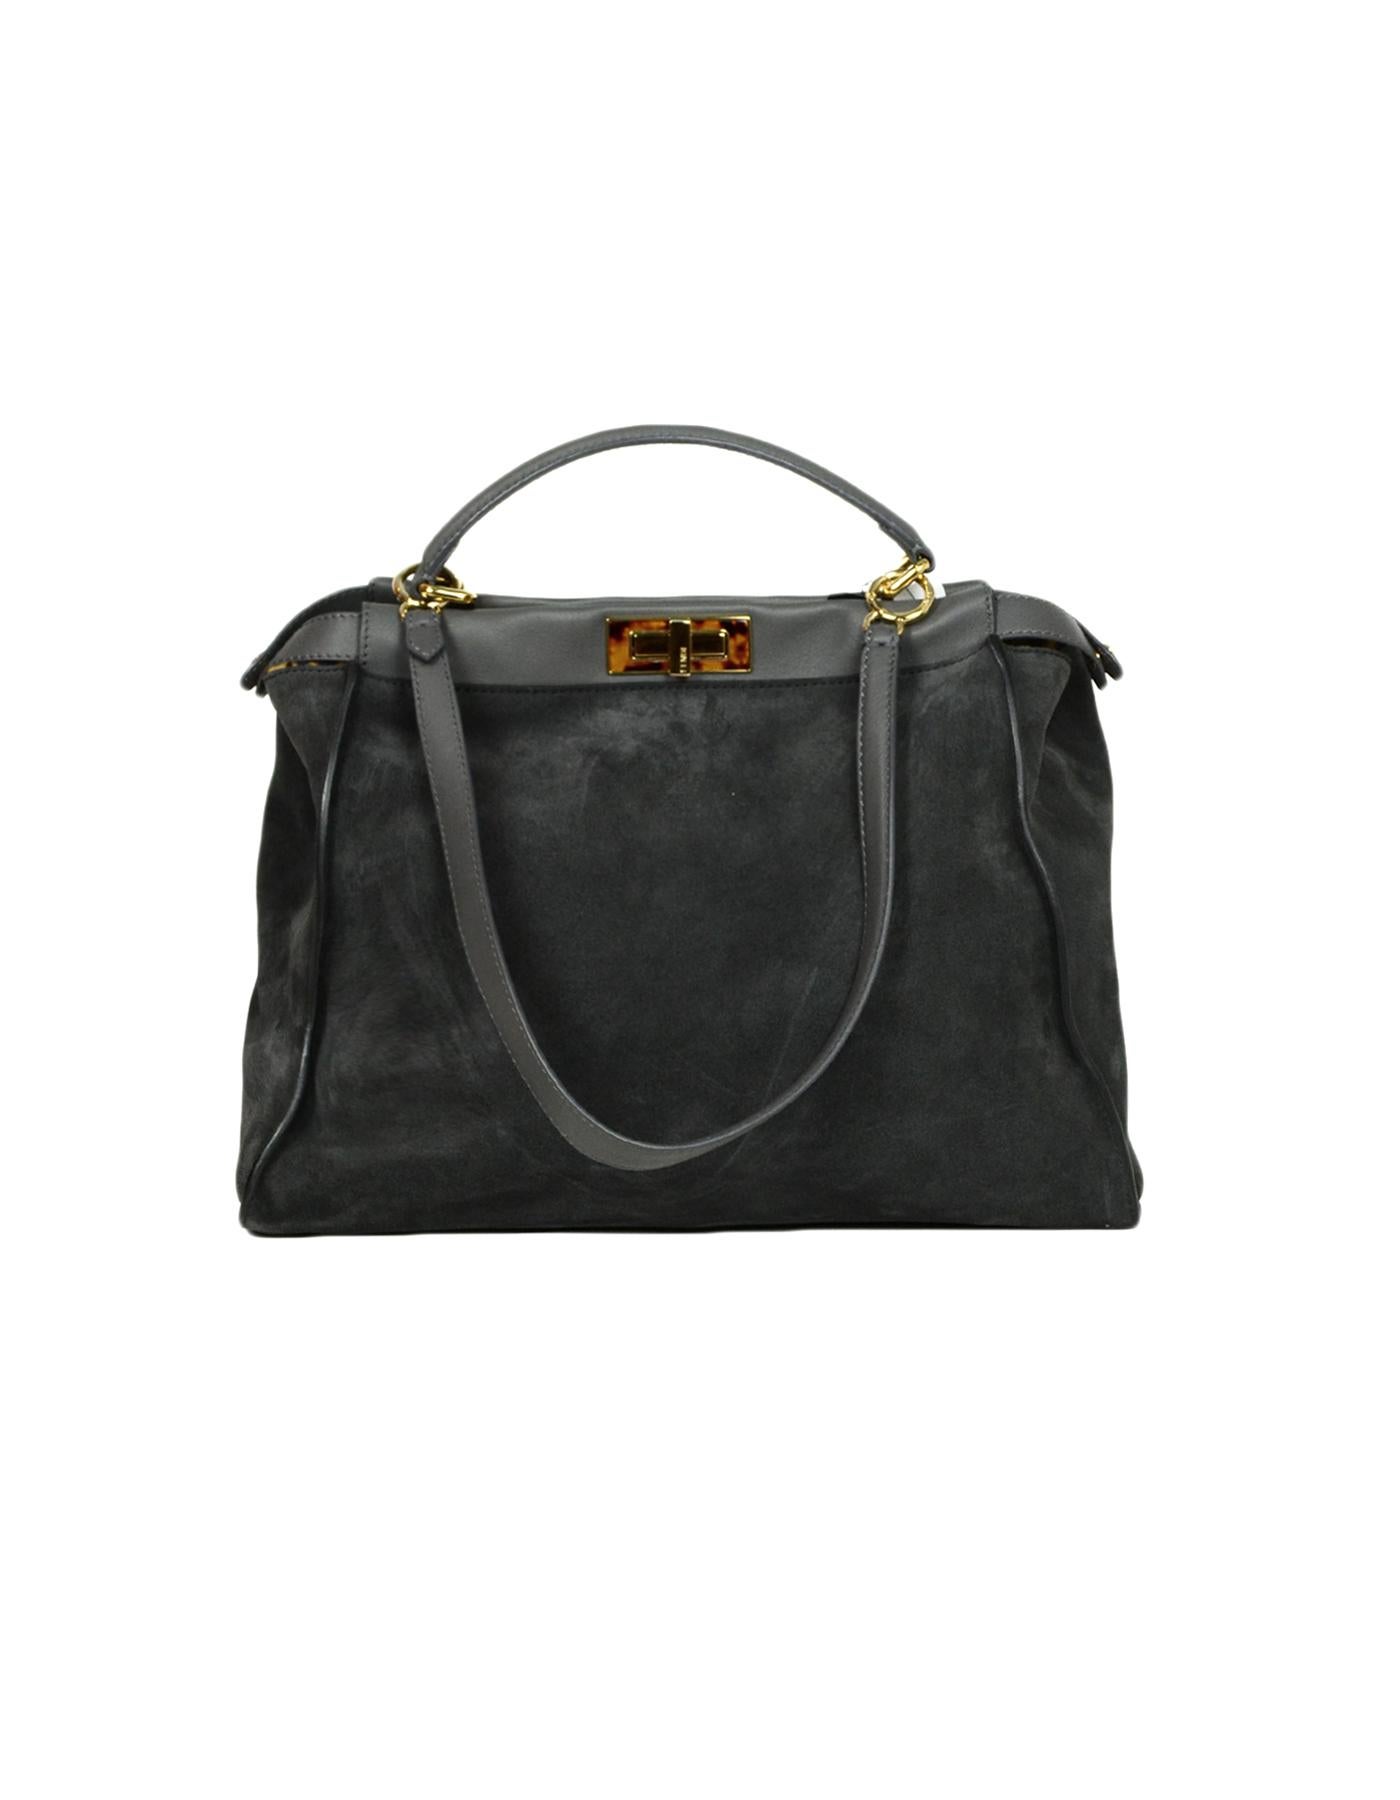 Fendi Grey Suede Large Peekaboo Bag w. Leopard Print Calf Hair Interior rt $4950 In Excellent Condition In New York, NY